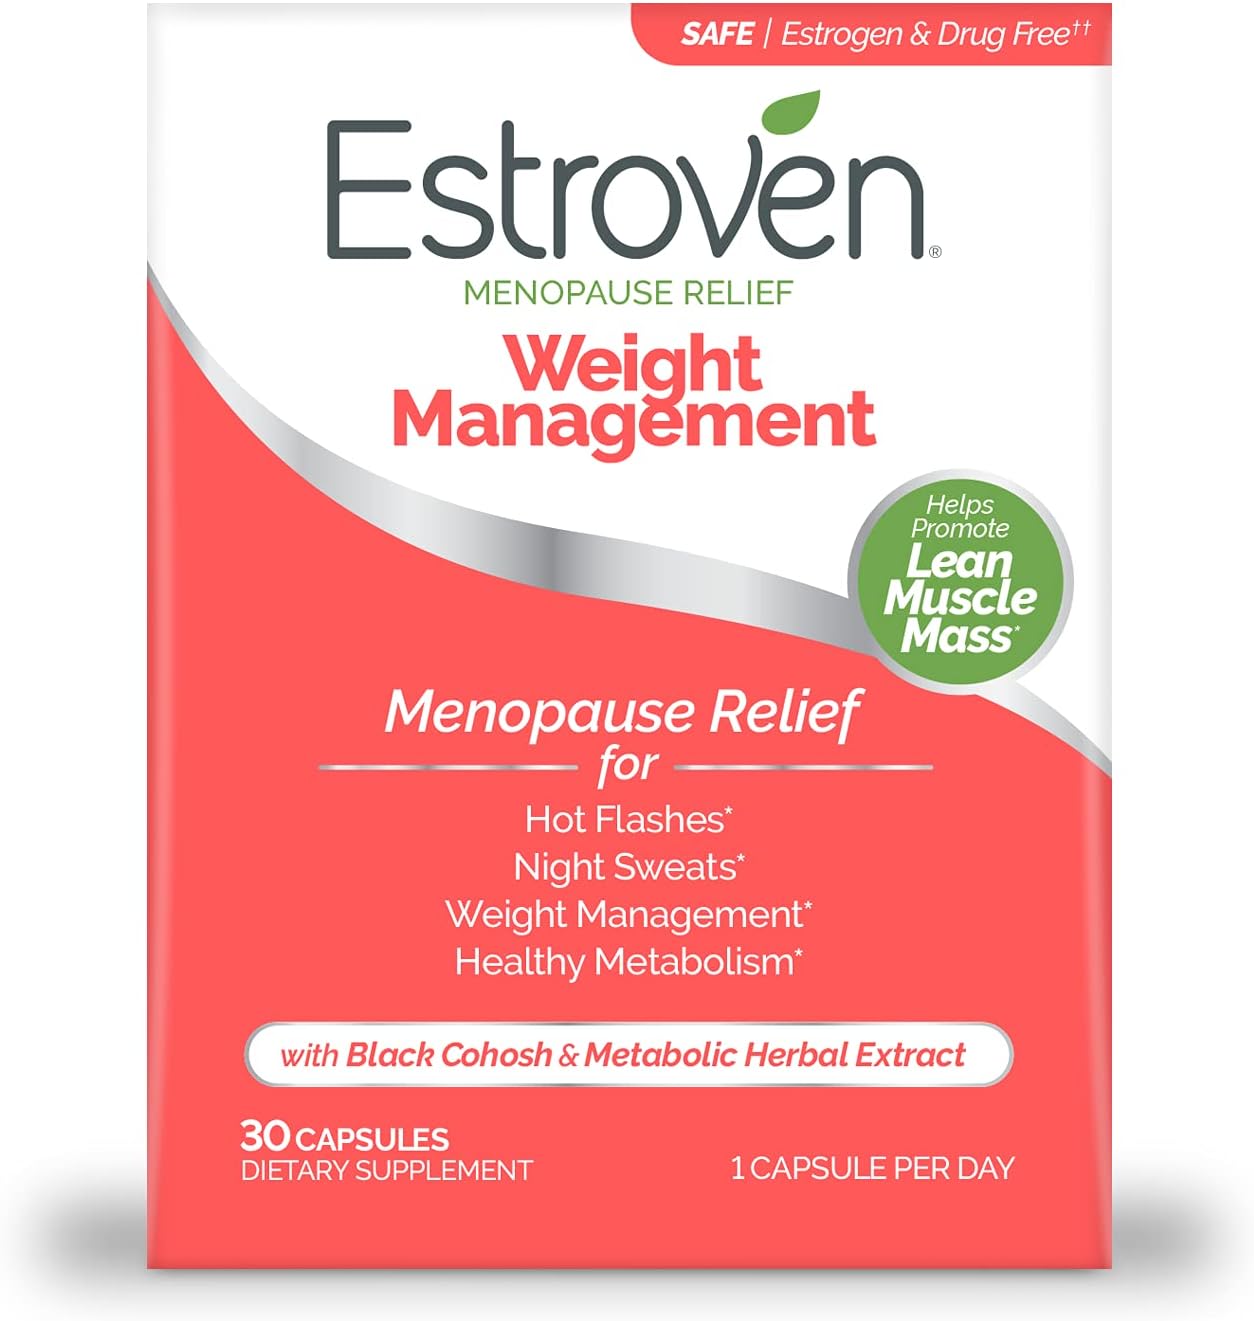 Estroven Weight Management for Menopause Relief